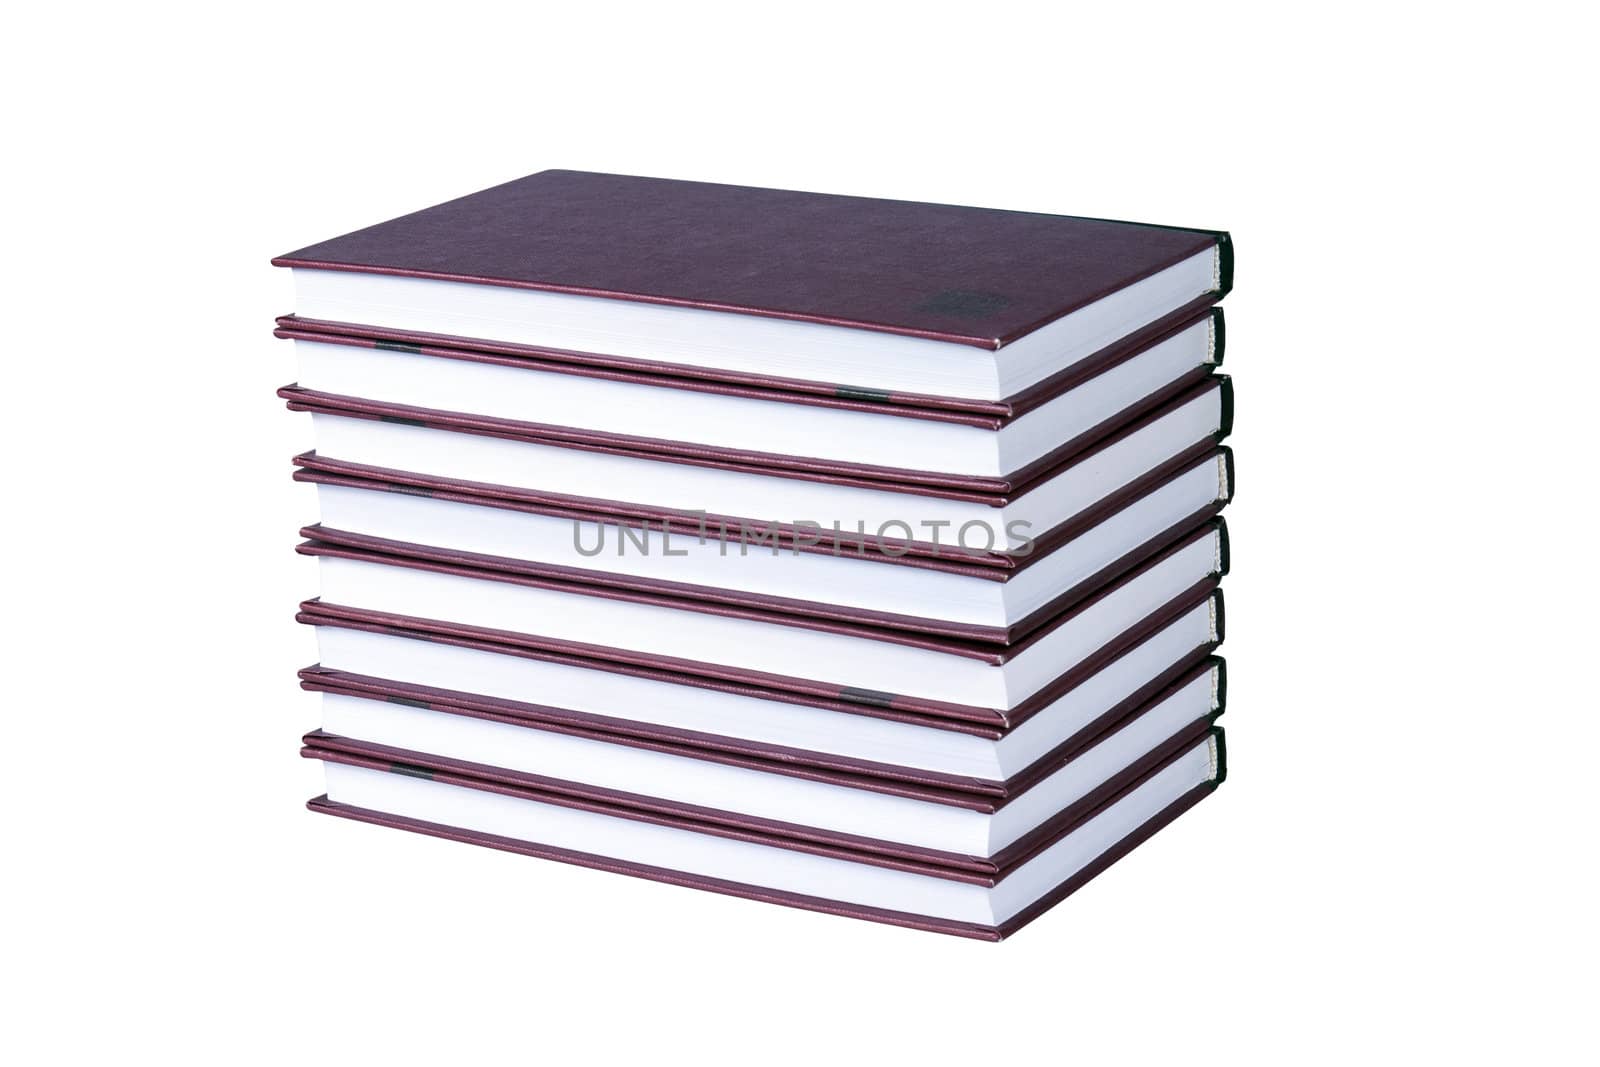 The books are neatly stacked   isolated on white with clipping path              